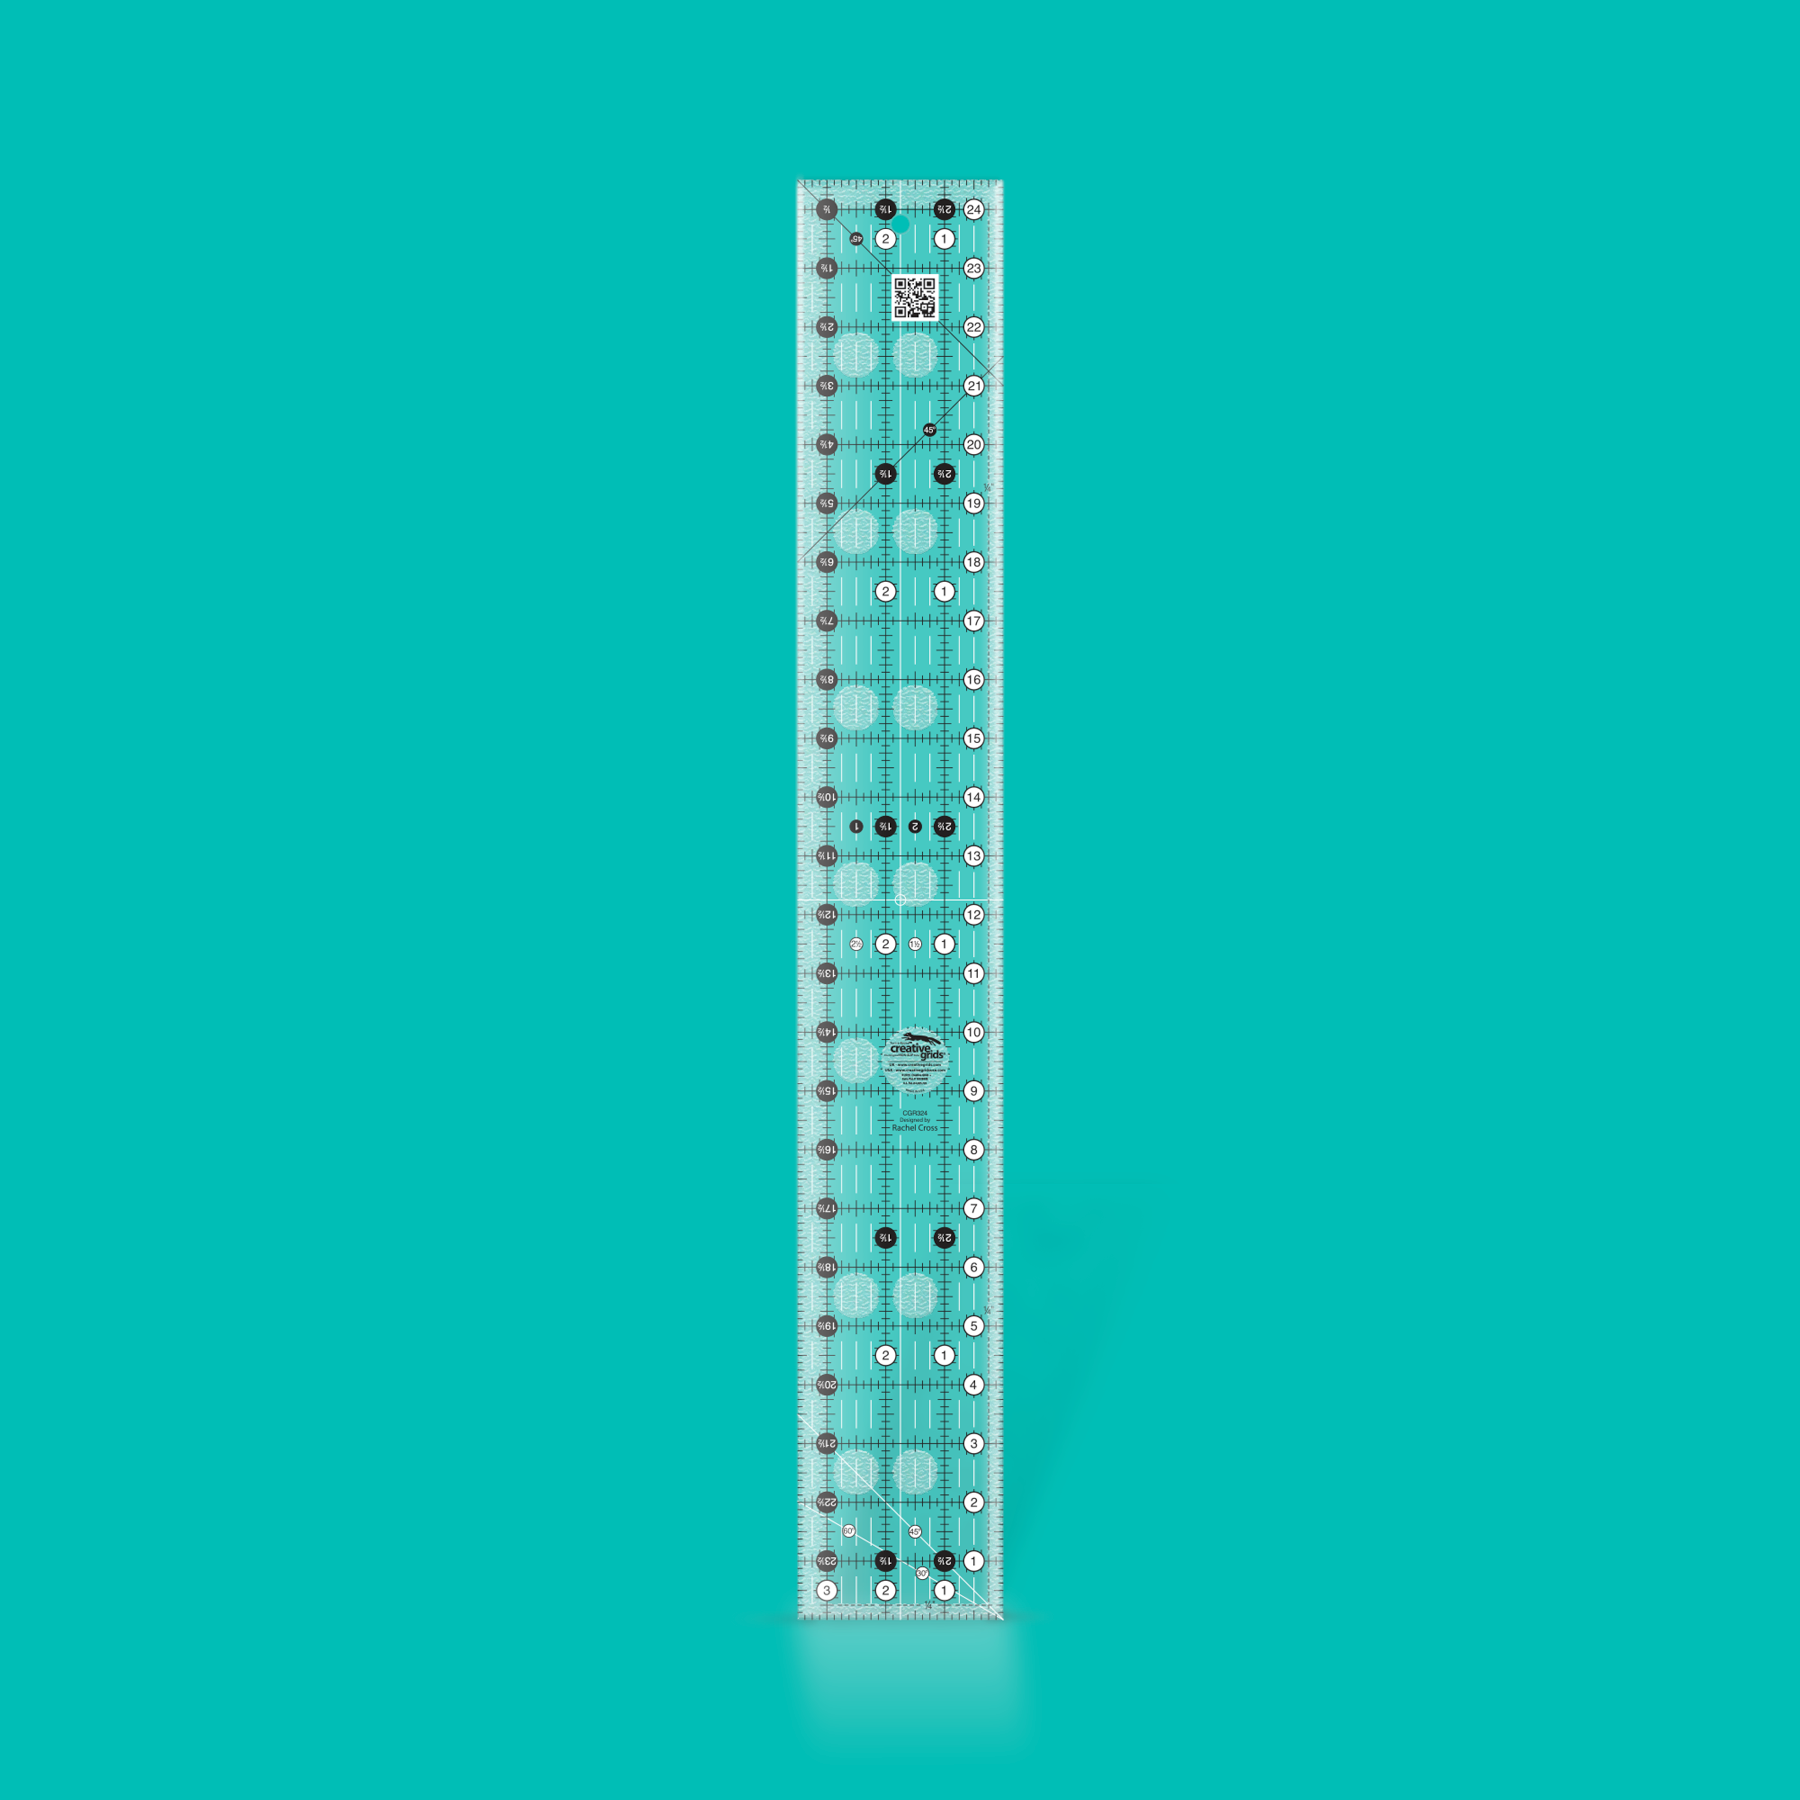 Creative Grids Quilt Ruler 3-1/2in x 24-1/2in - CGR324